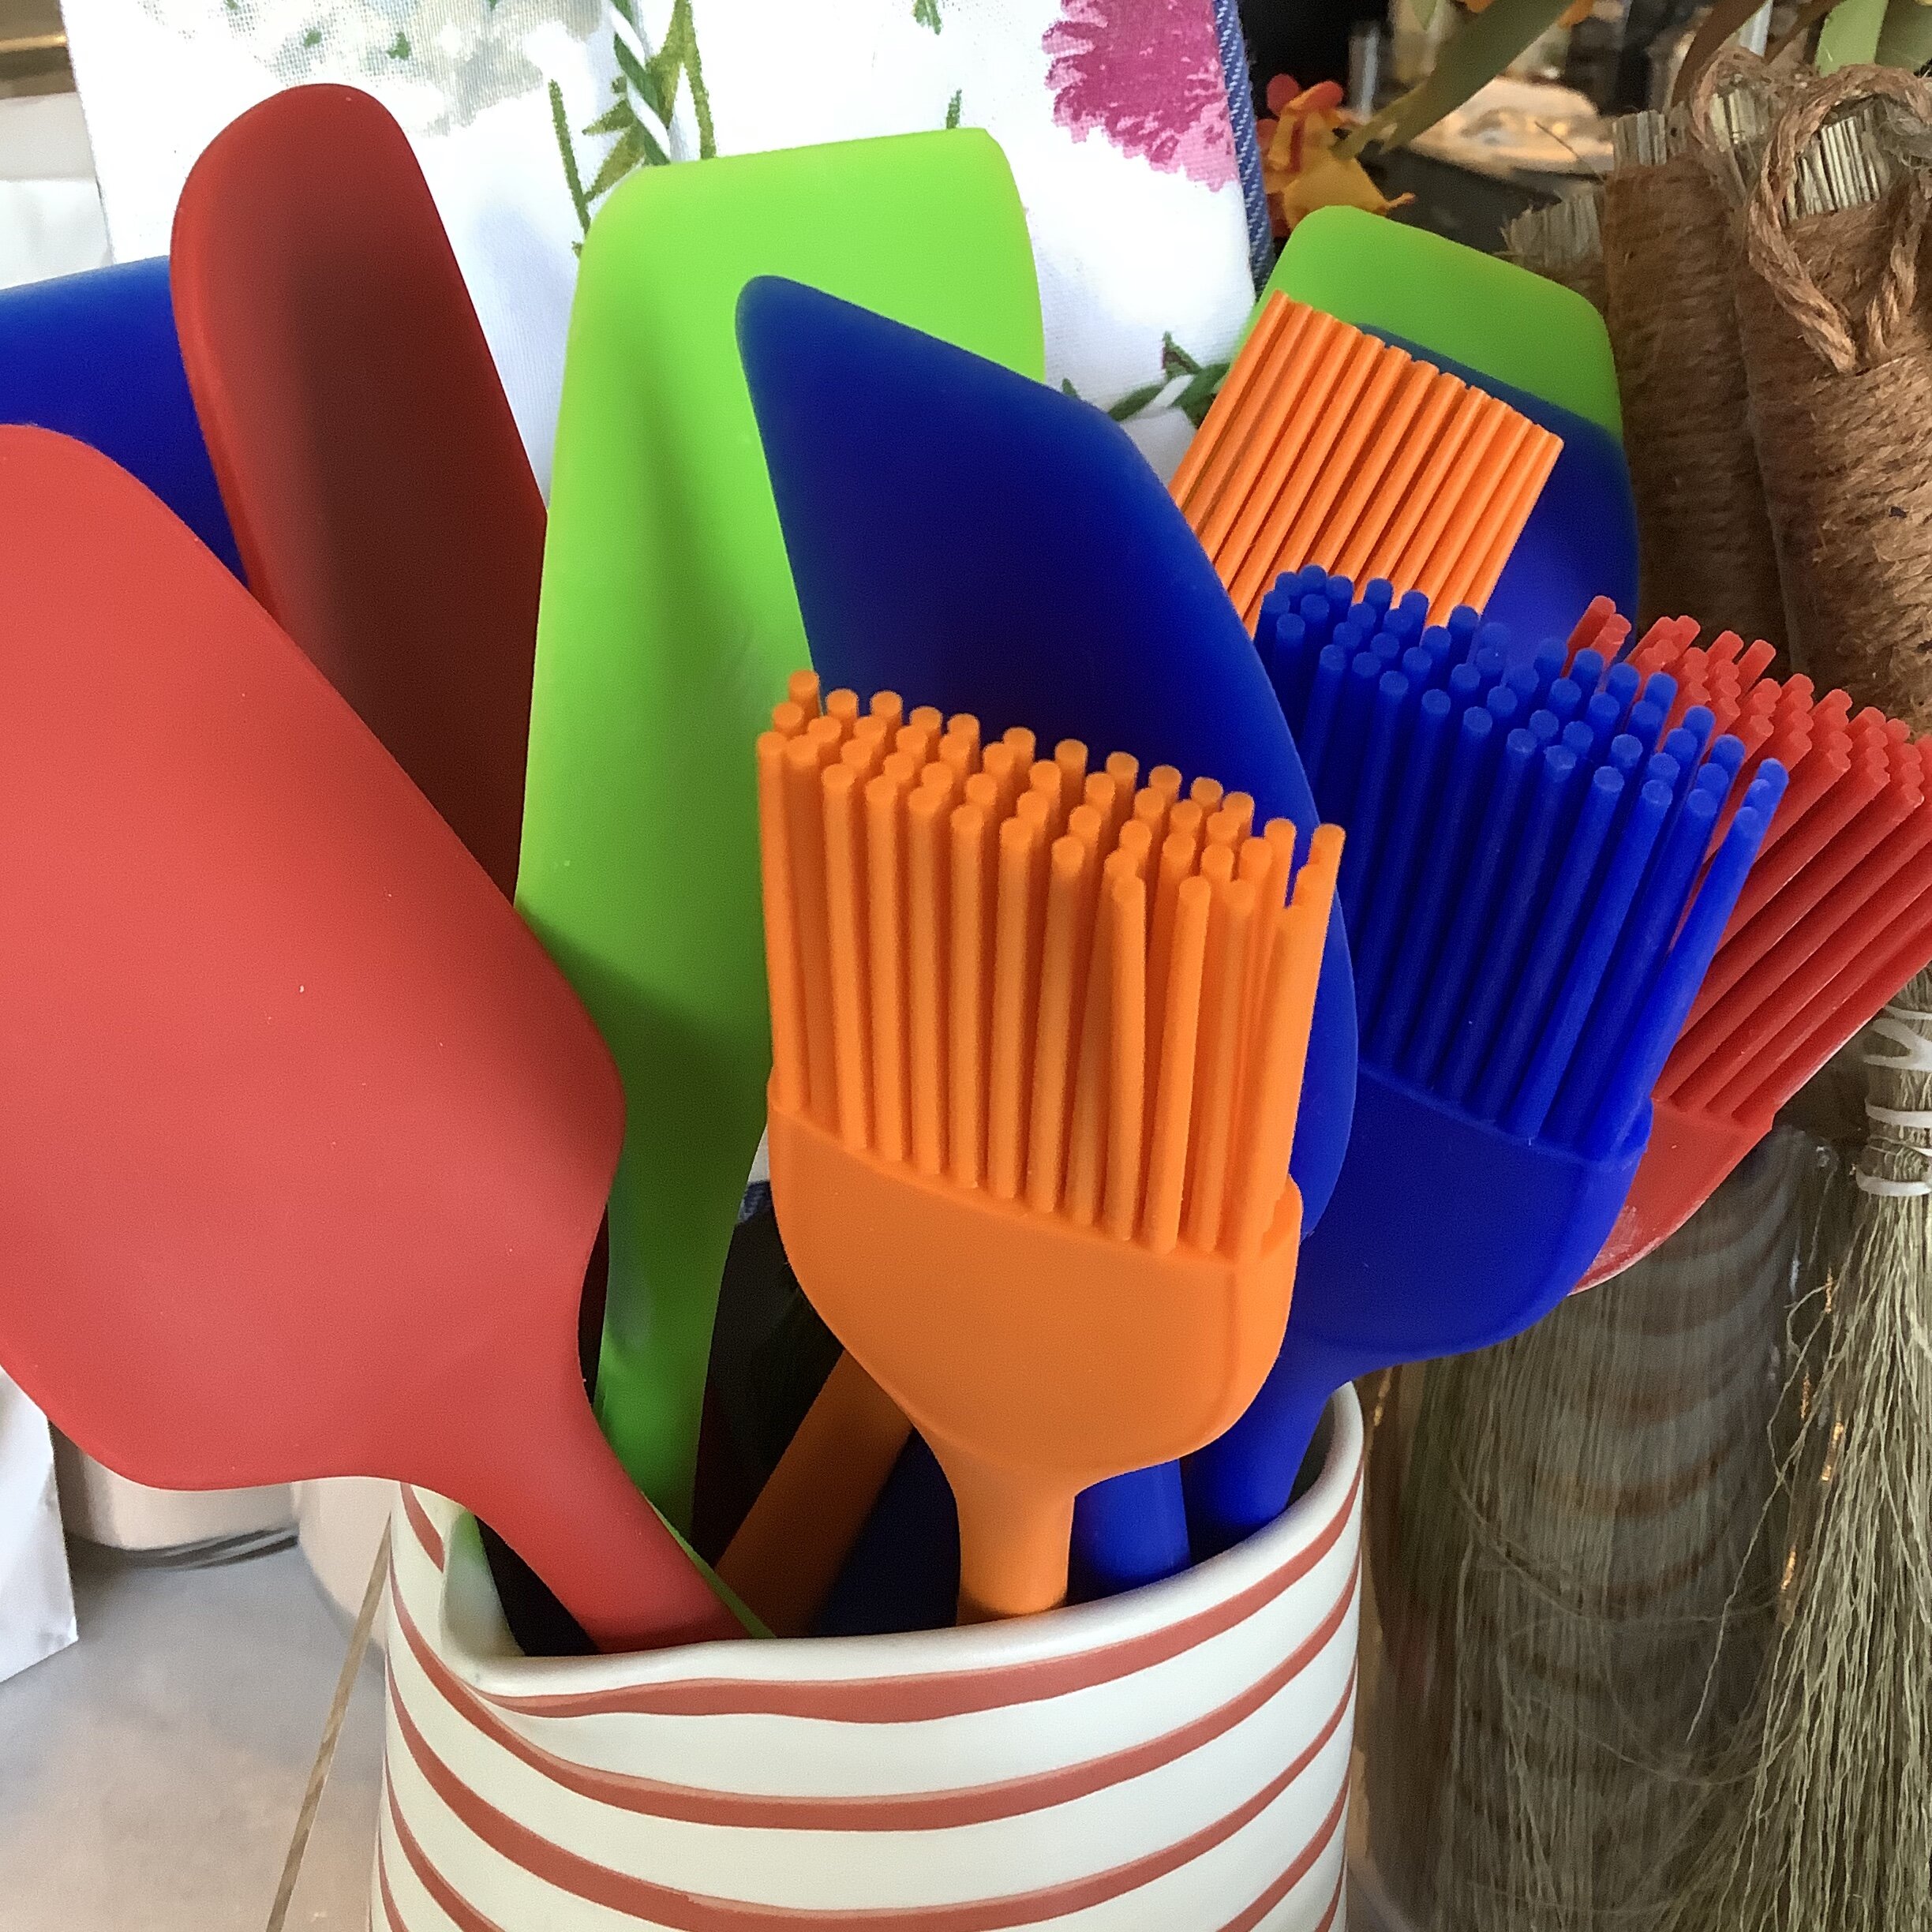 Silicone Kitchen Tools